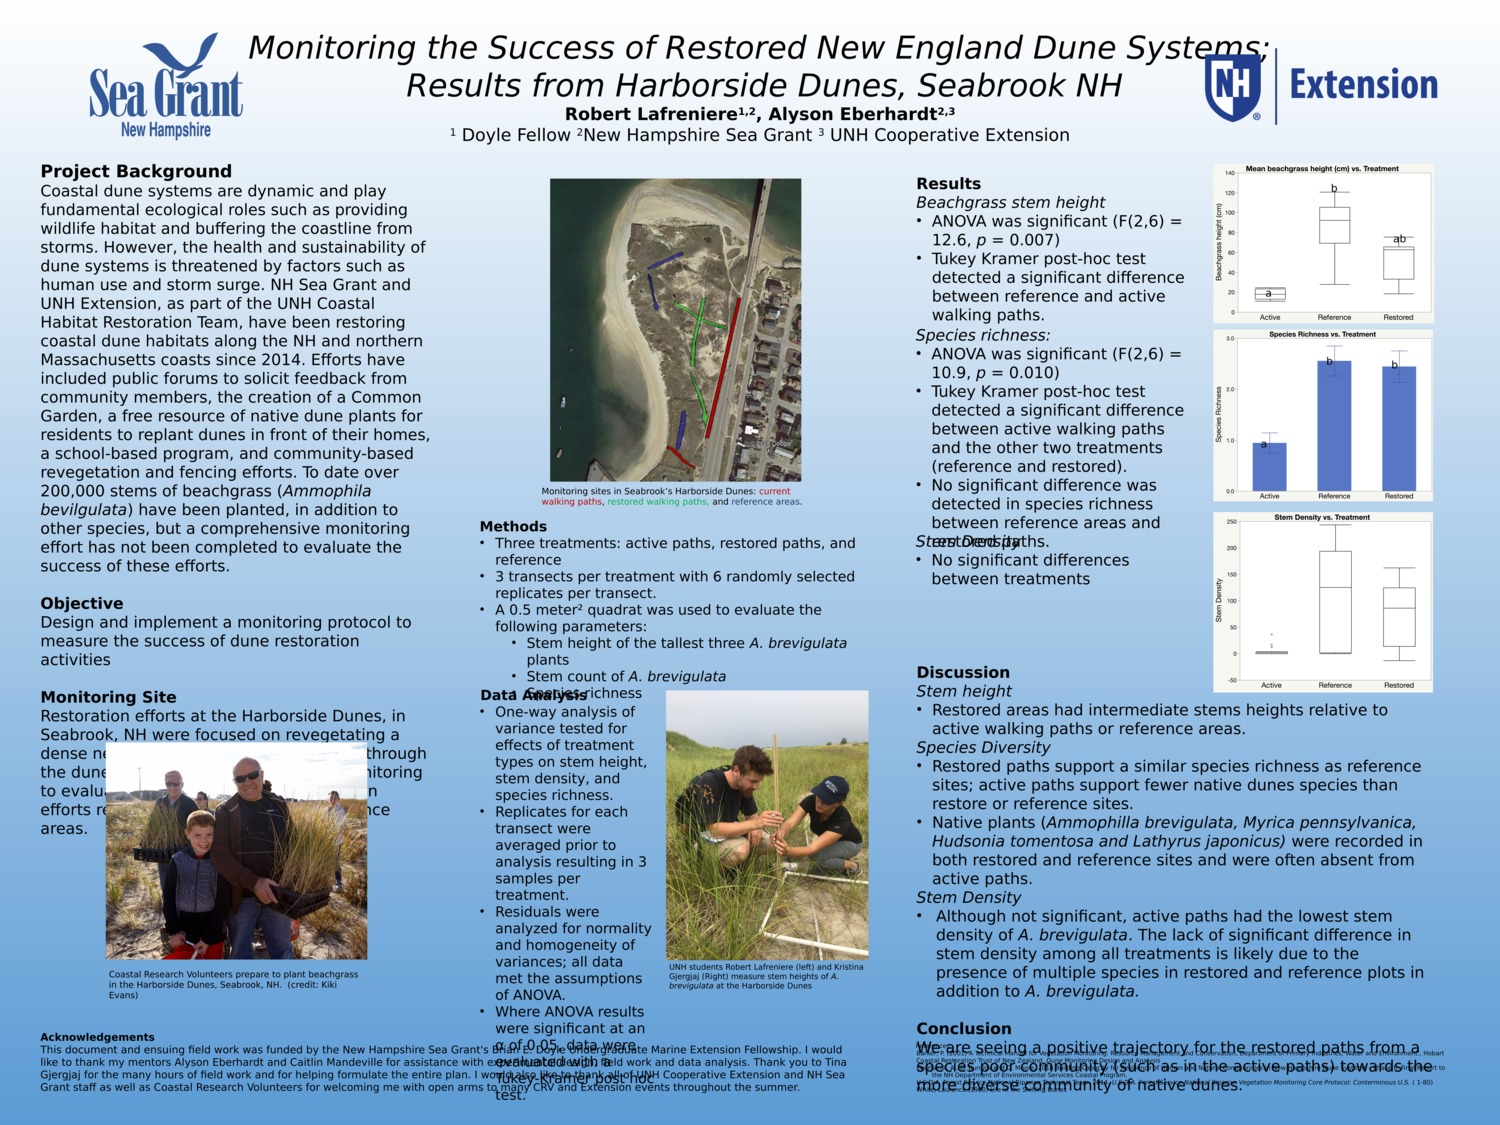 Monitoring The Success Of Restored New England Dune Systems;  Results From Harborside Dunes, Seabrook Nh by alysone